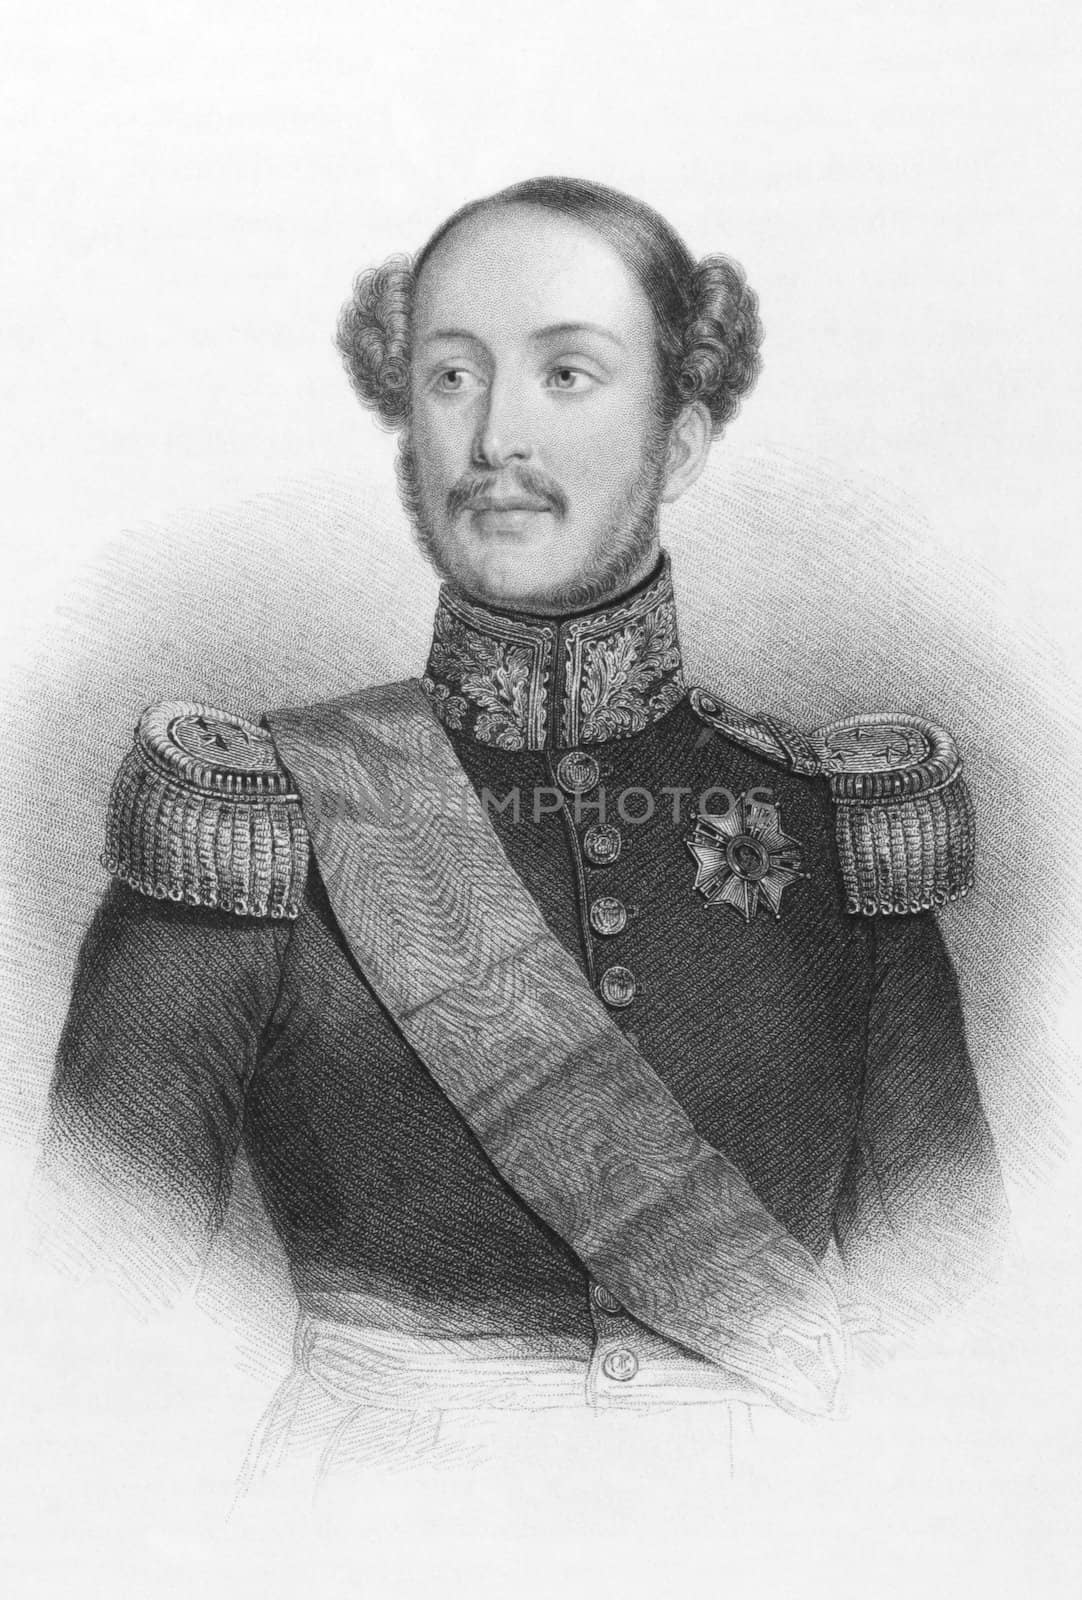 Ferdinand Philippe, Duke of Orleans on engraving from the 1800s. Eldest son of the future king Louis-Philippe of France. Published in London by Fisher, Son & Co.